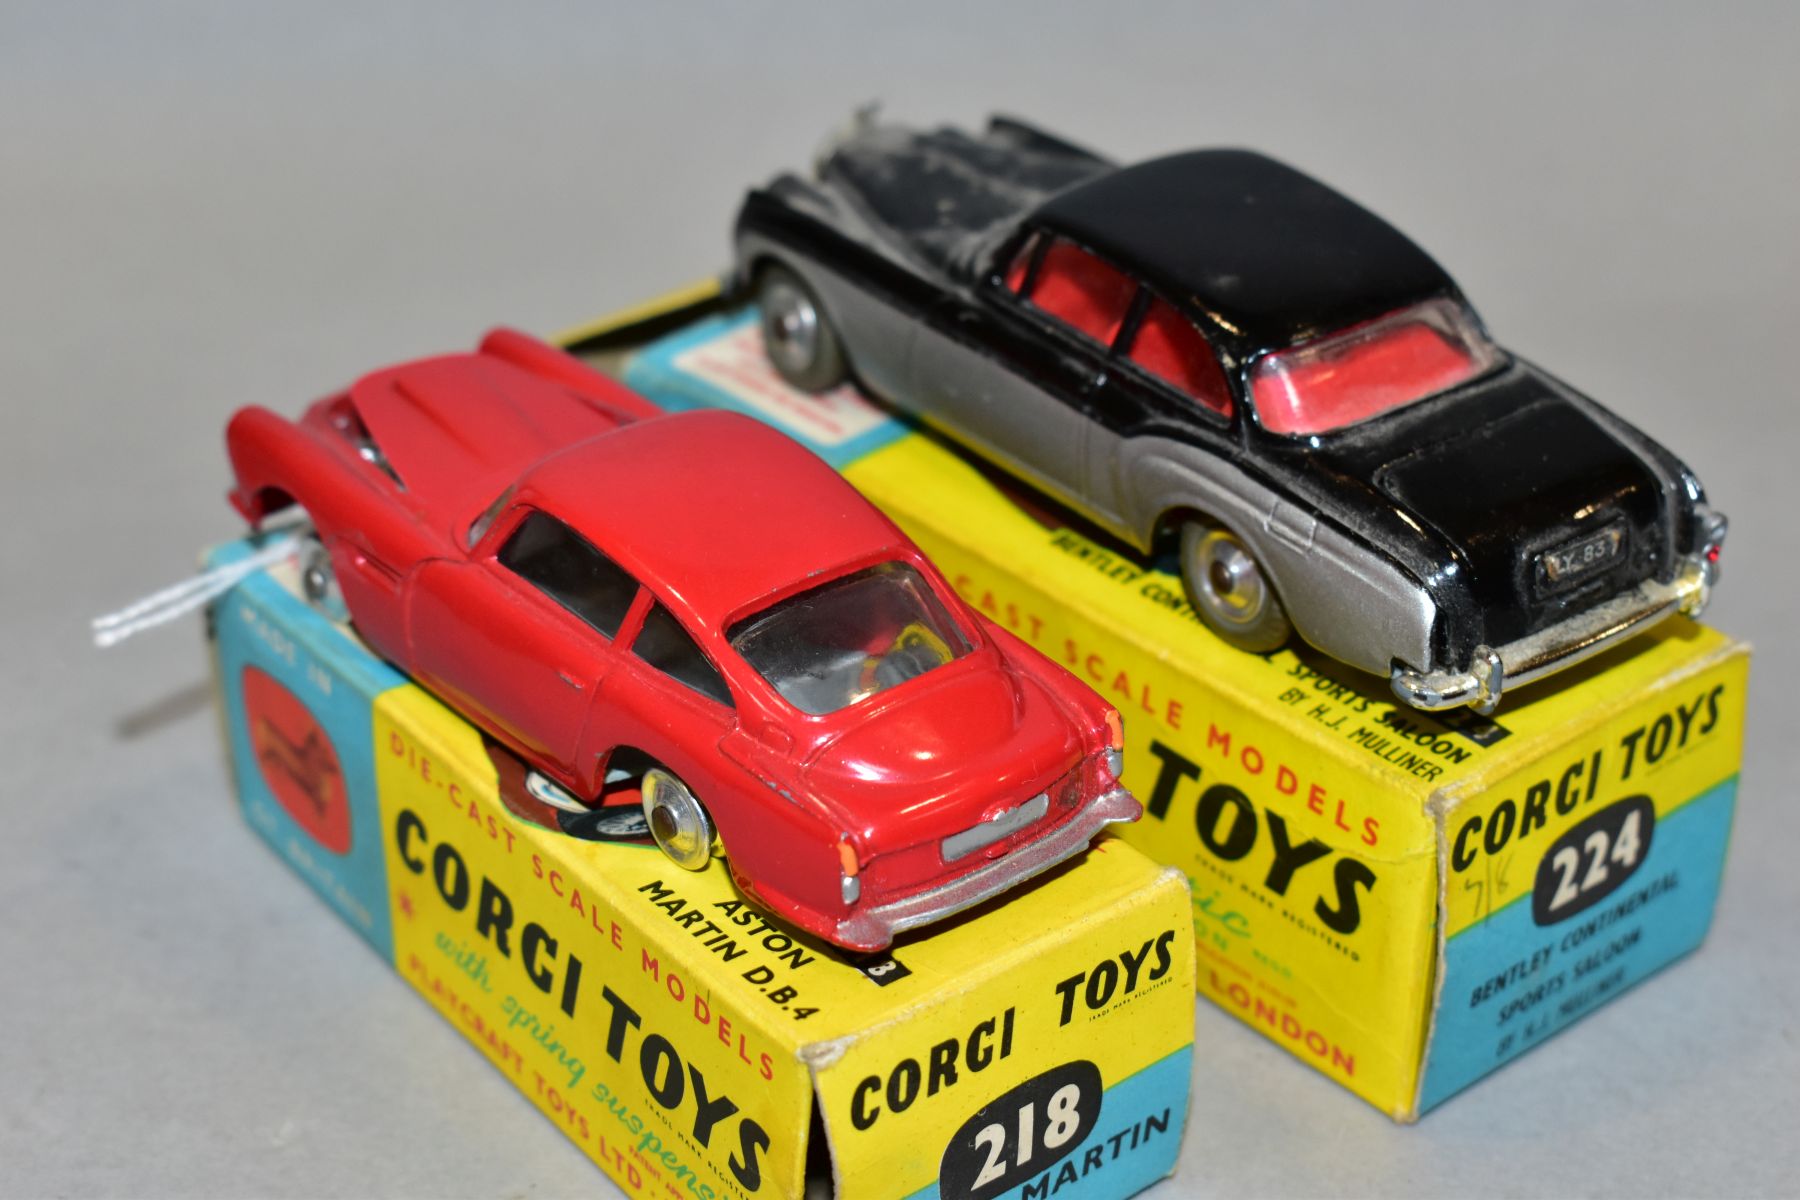 TWO BOXED CORGI TOYS CARS, Bentley Continental Sports Saloon, No 224, black over silver body with - Image 5 of 7